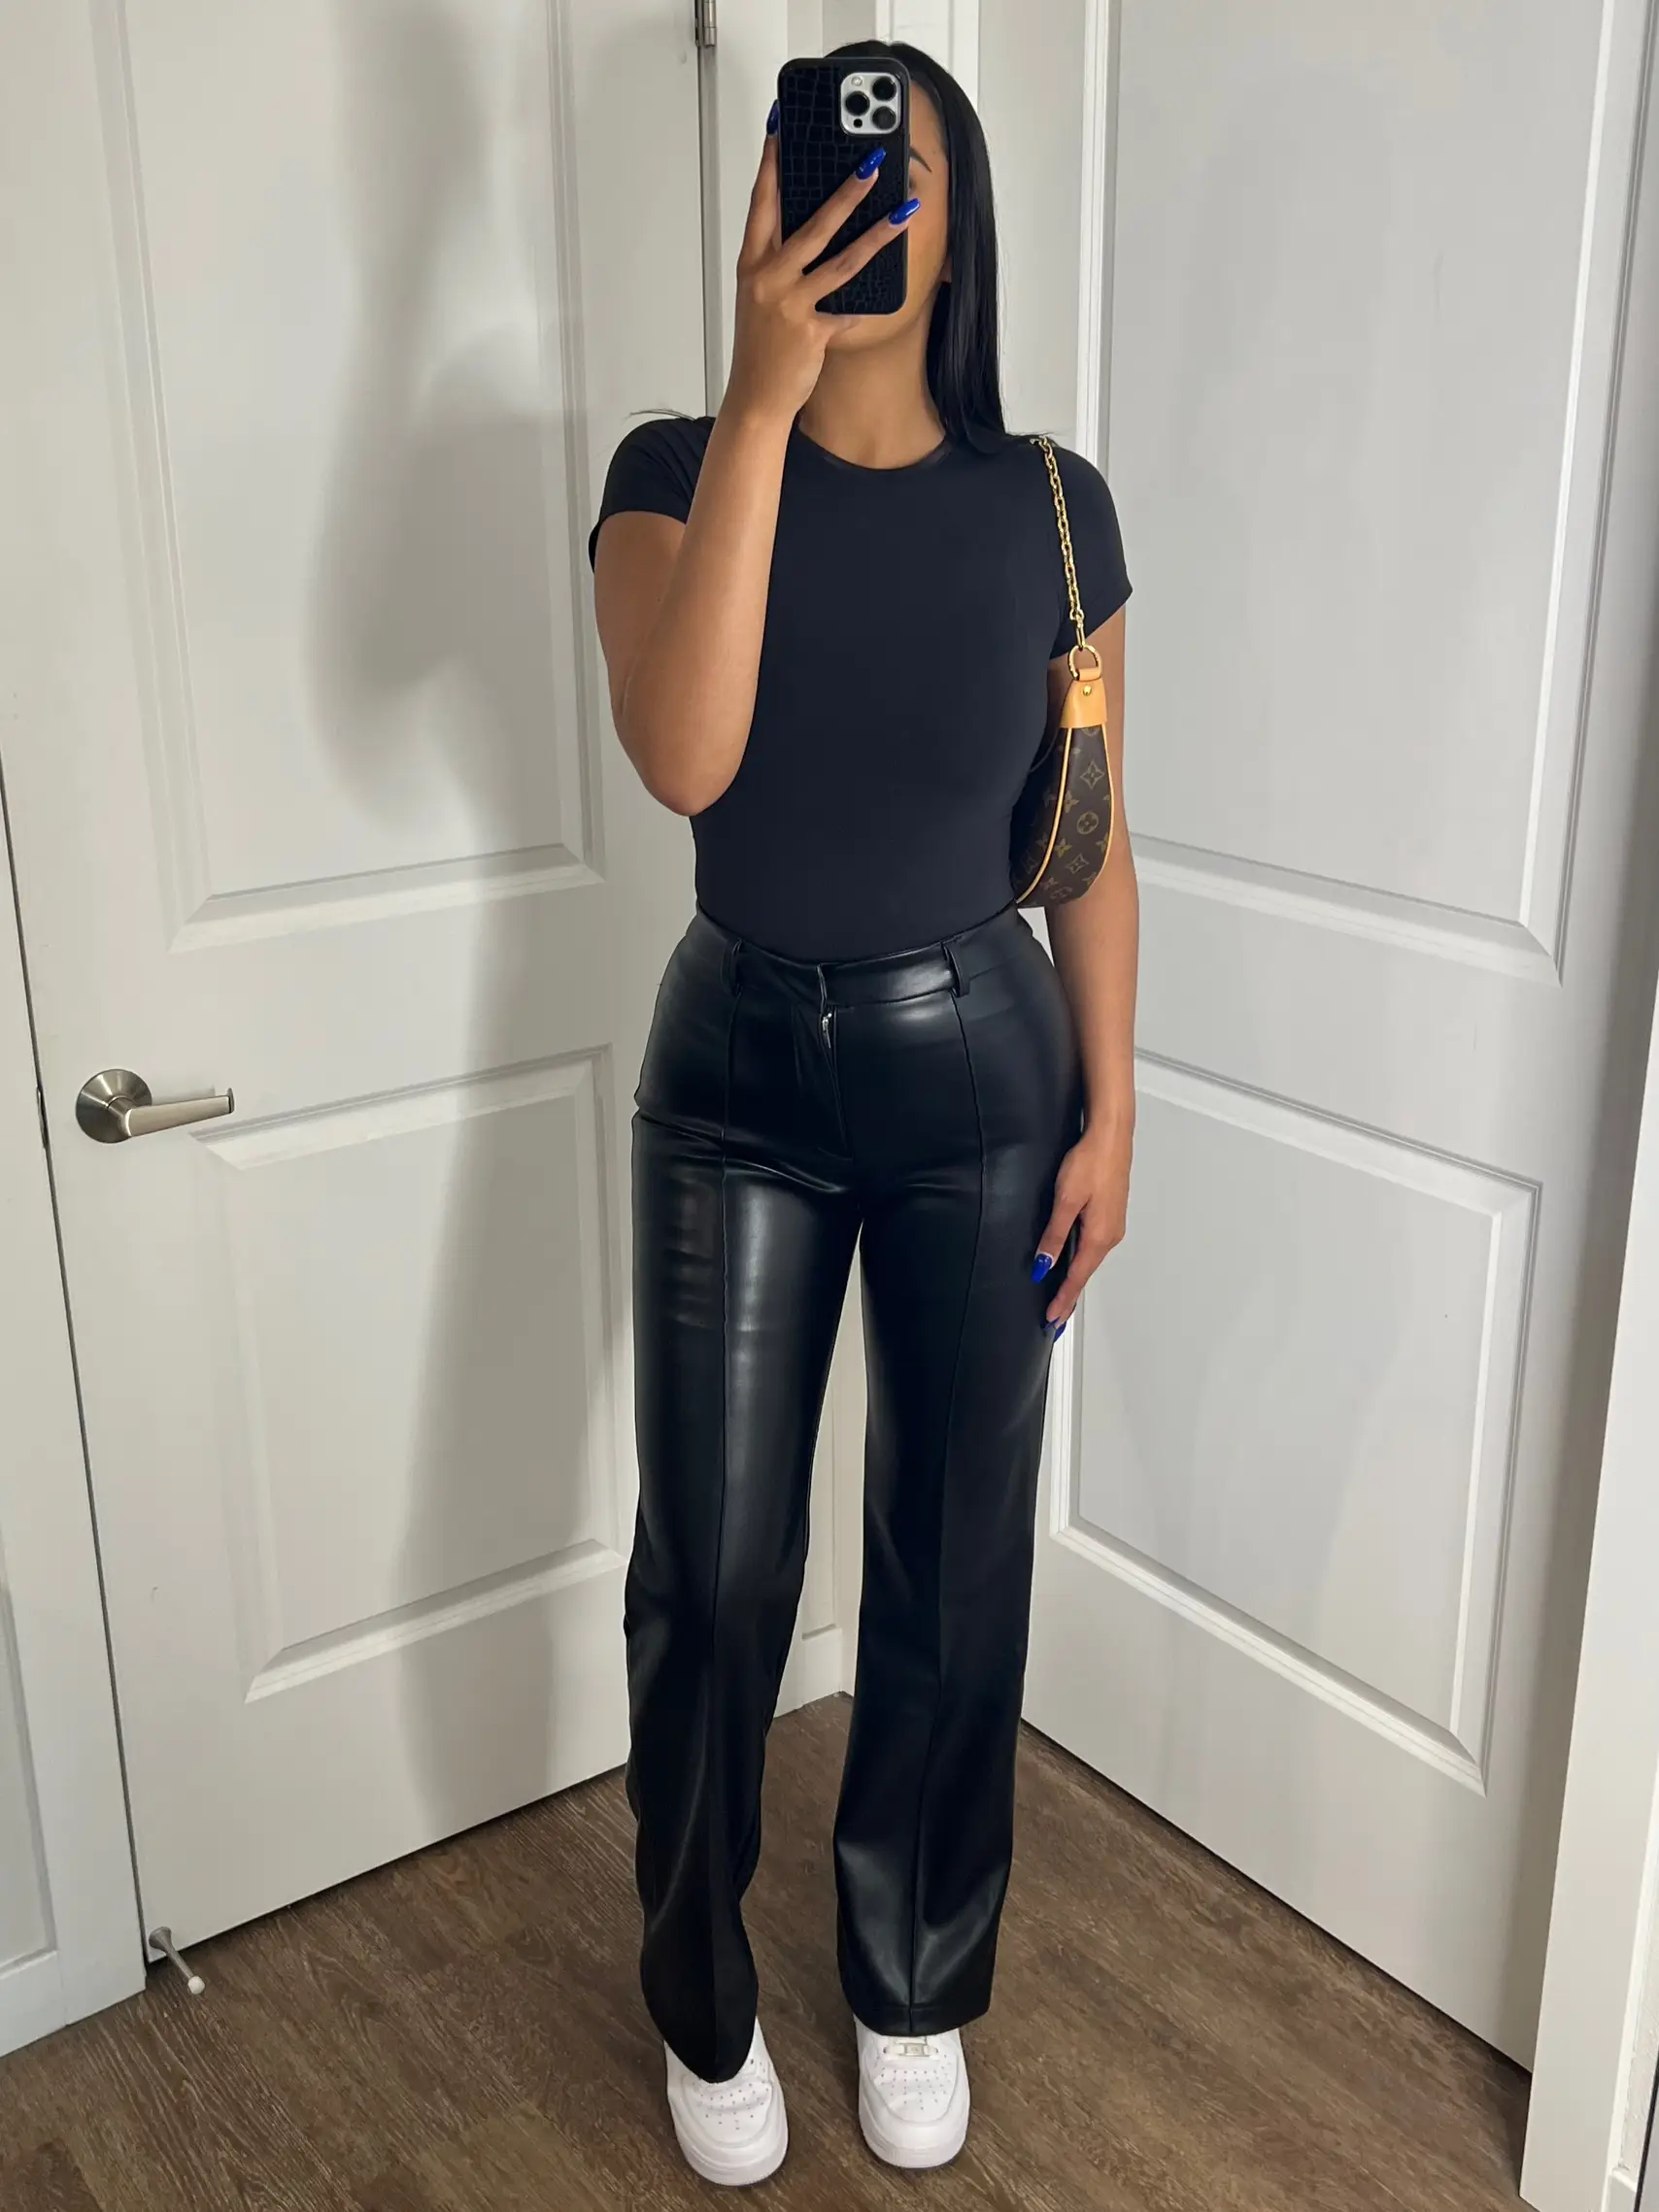 12 Easy Ways To Style Leather Paper Bag Waist Pants 2020 #leather